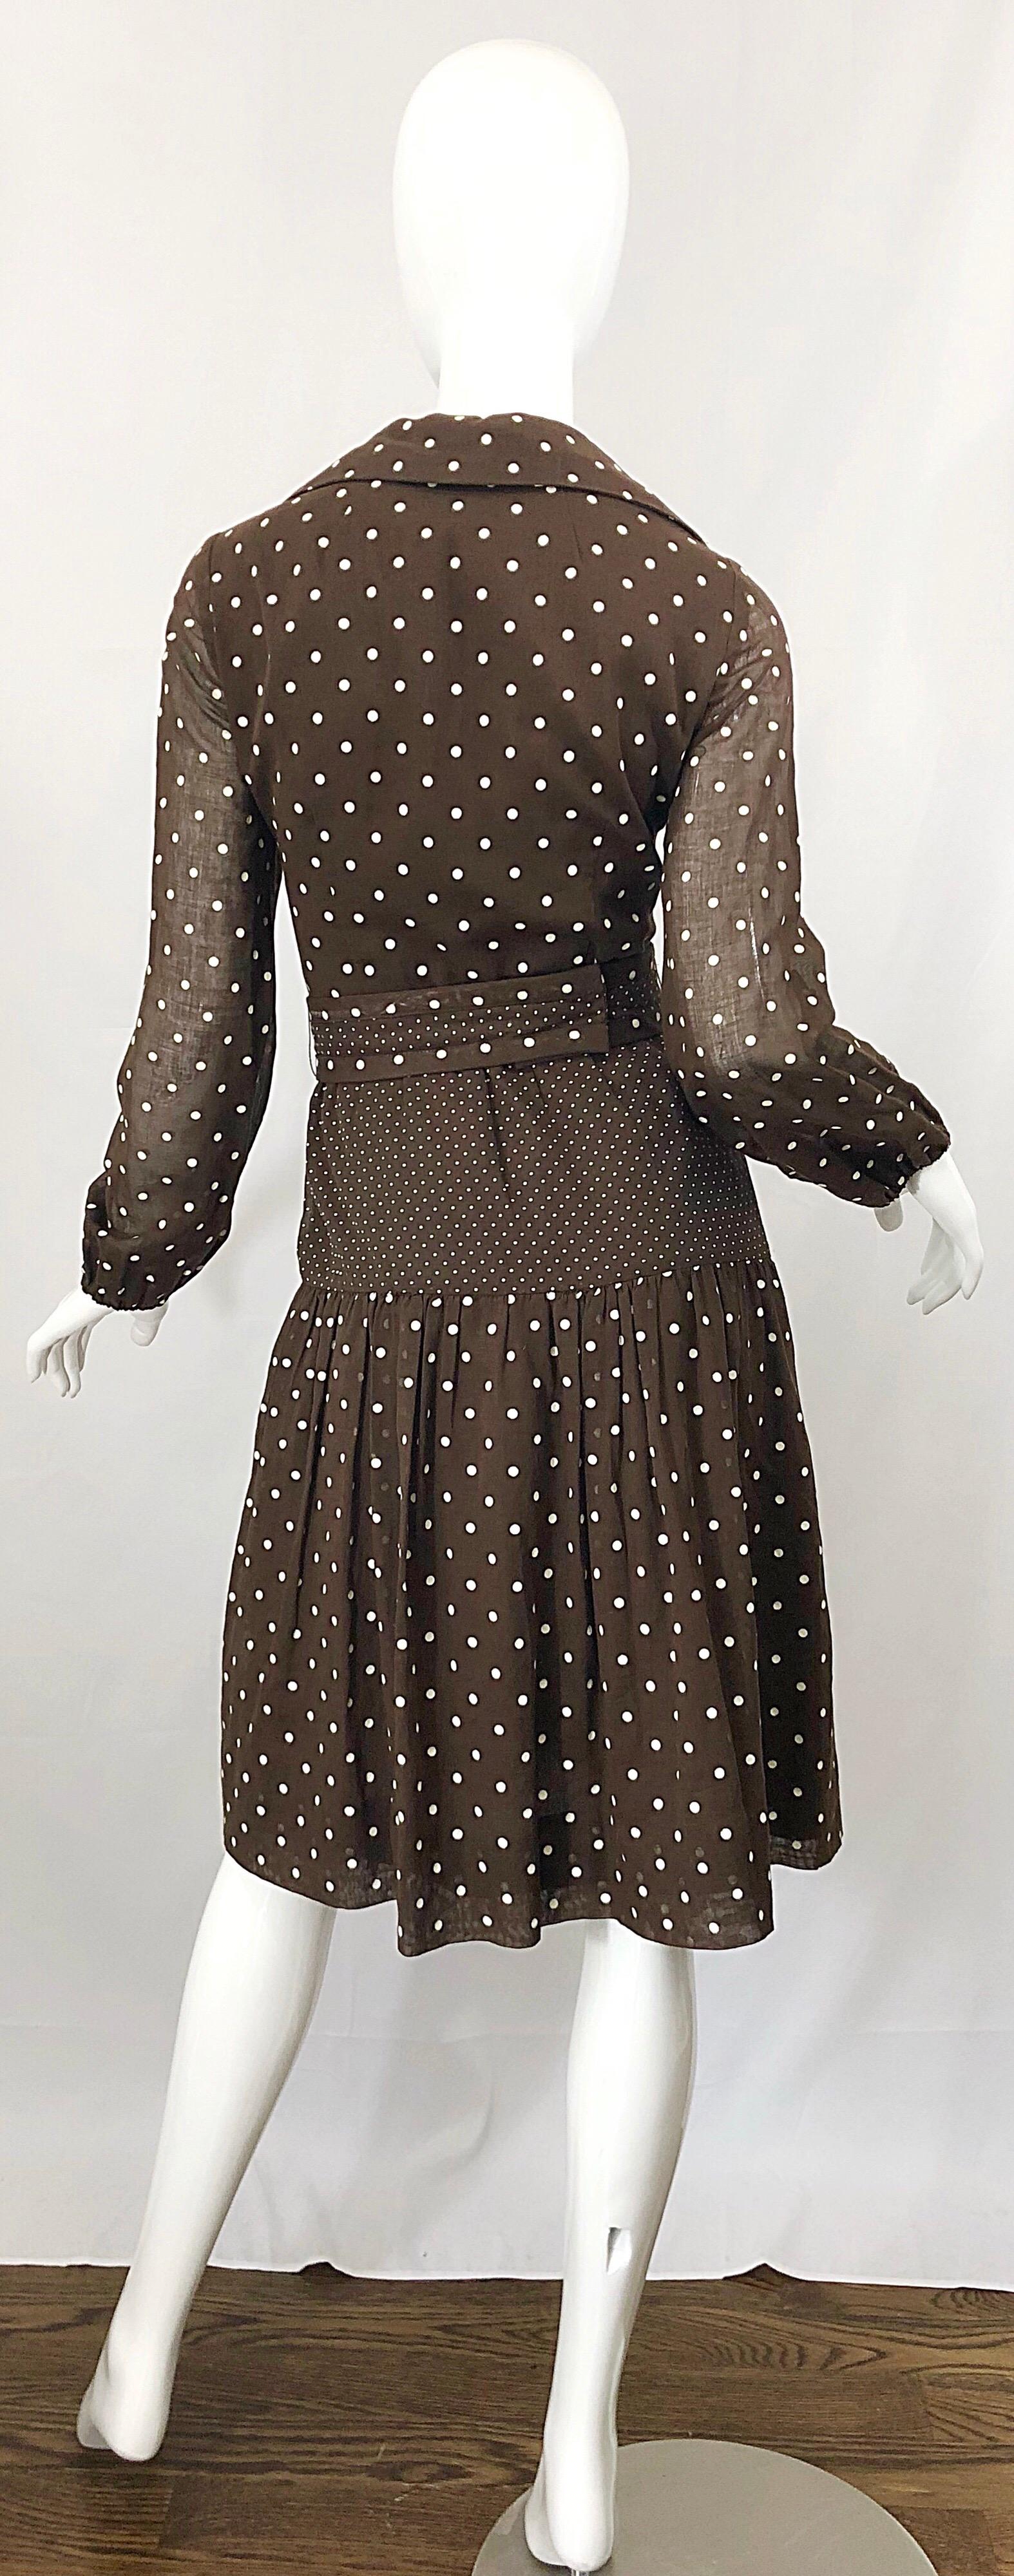 Women's 1970s I Magnin Brown and White Polka Dot Belted Cotton Vintage 70s Day Dress